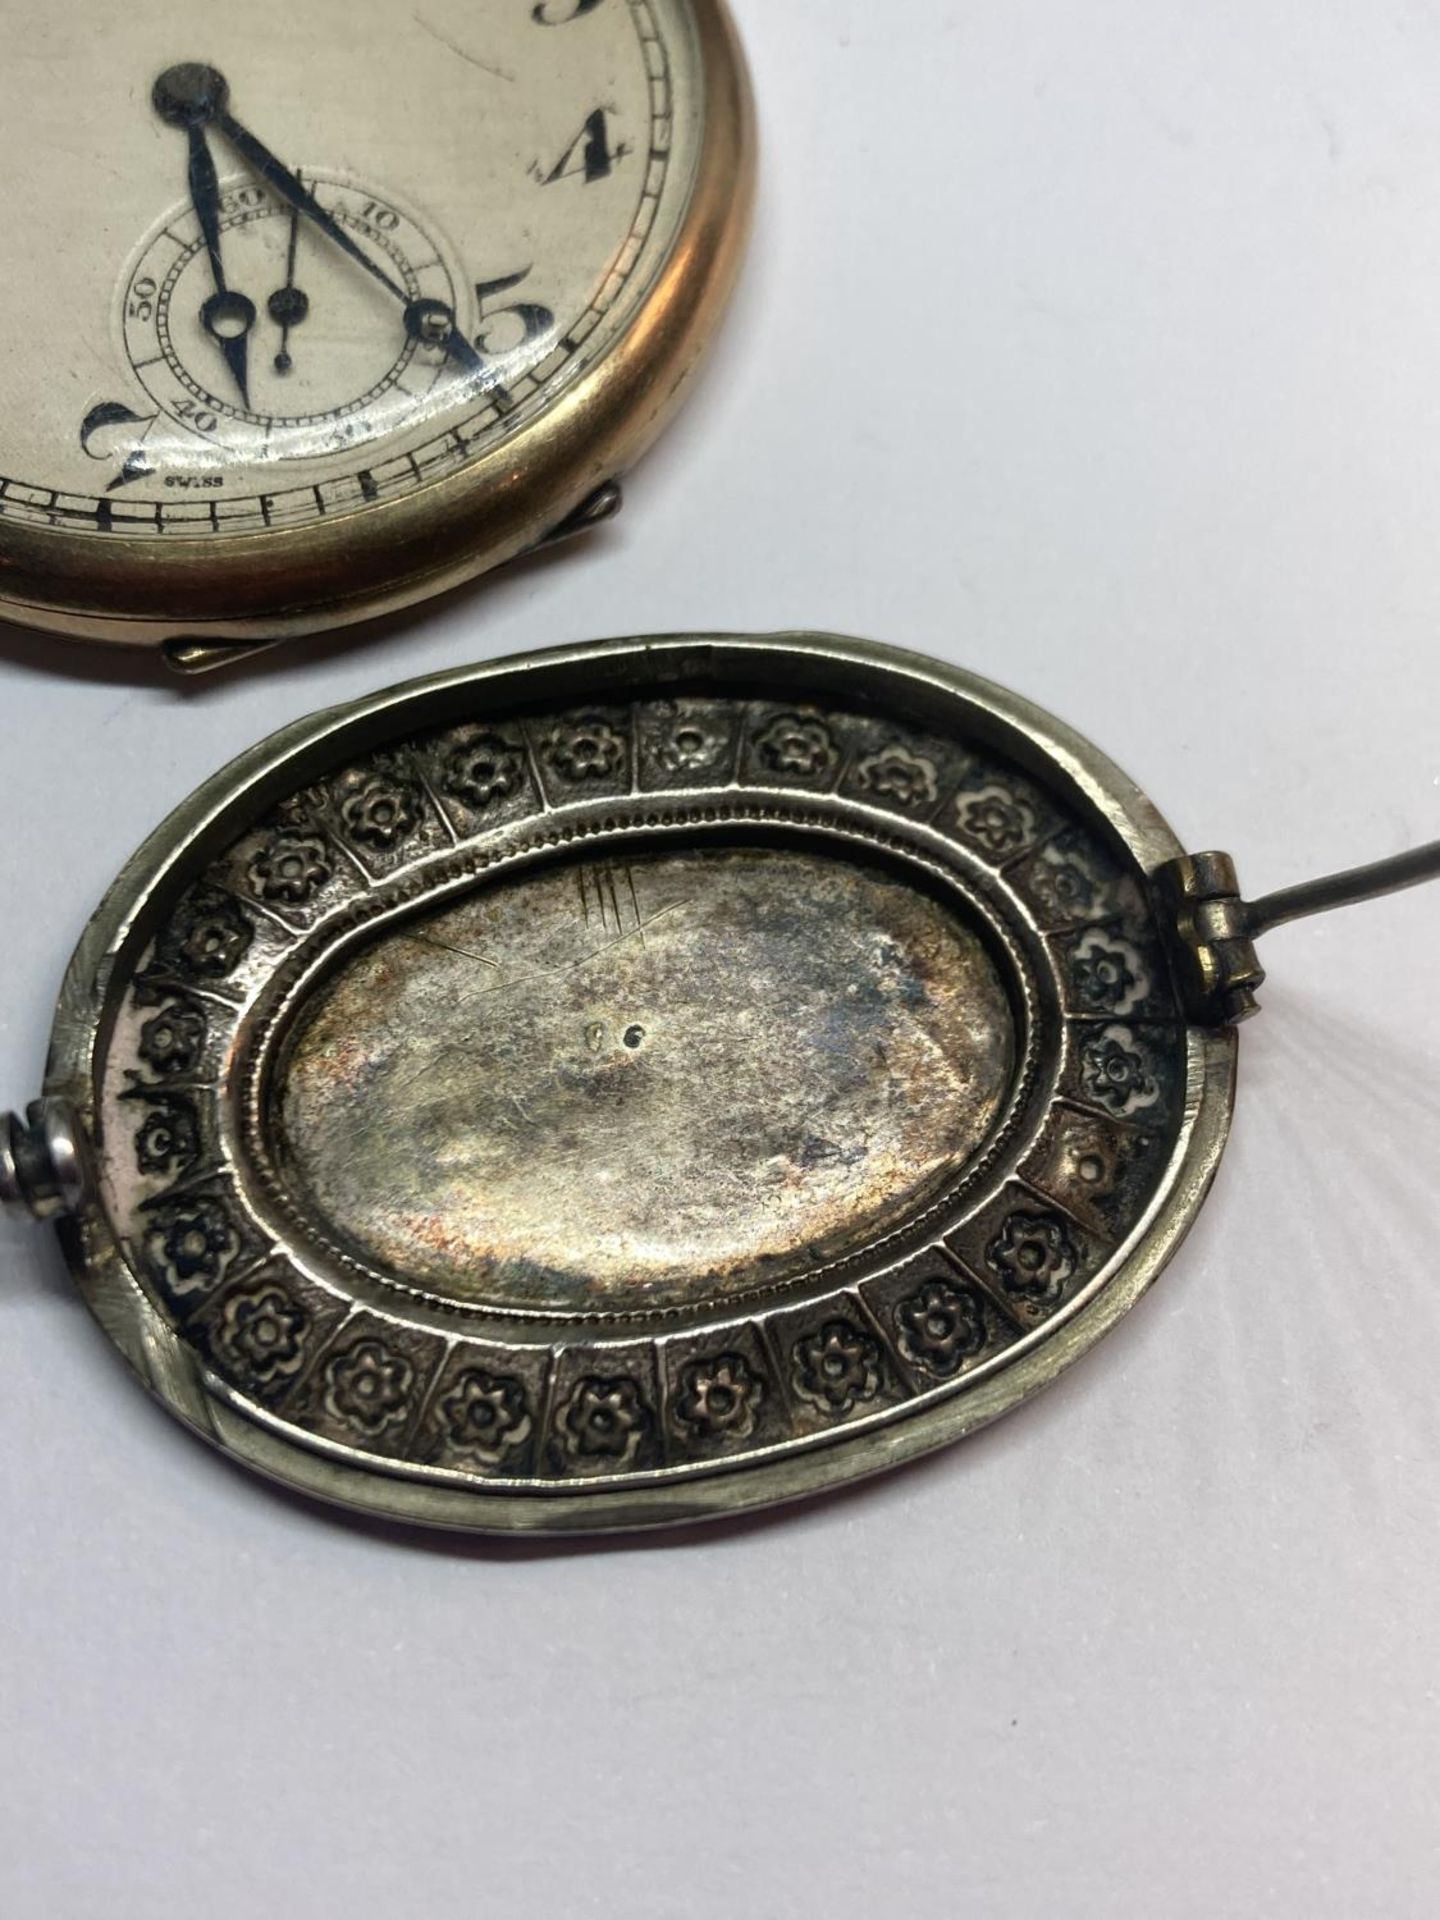 VARIOUS ITEMS TO INCLUDE A GOLD PLATED POCKET WATCH WITH CHAIN, A WHITE METAL POSSIBLY SILVER BROOCH - Image 4 of 6